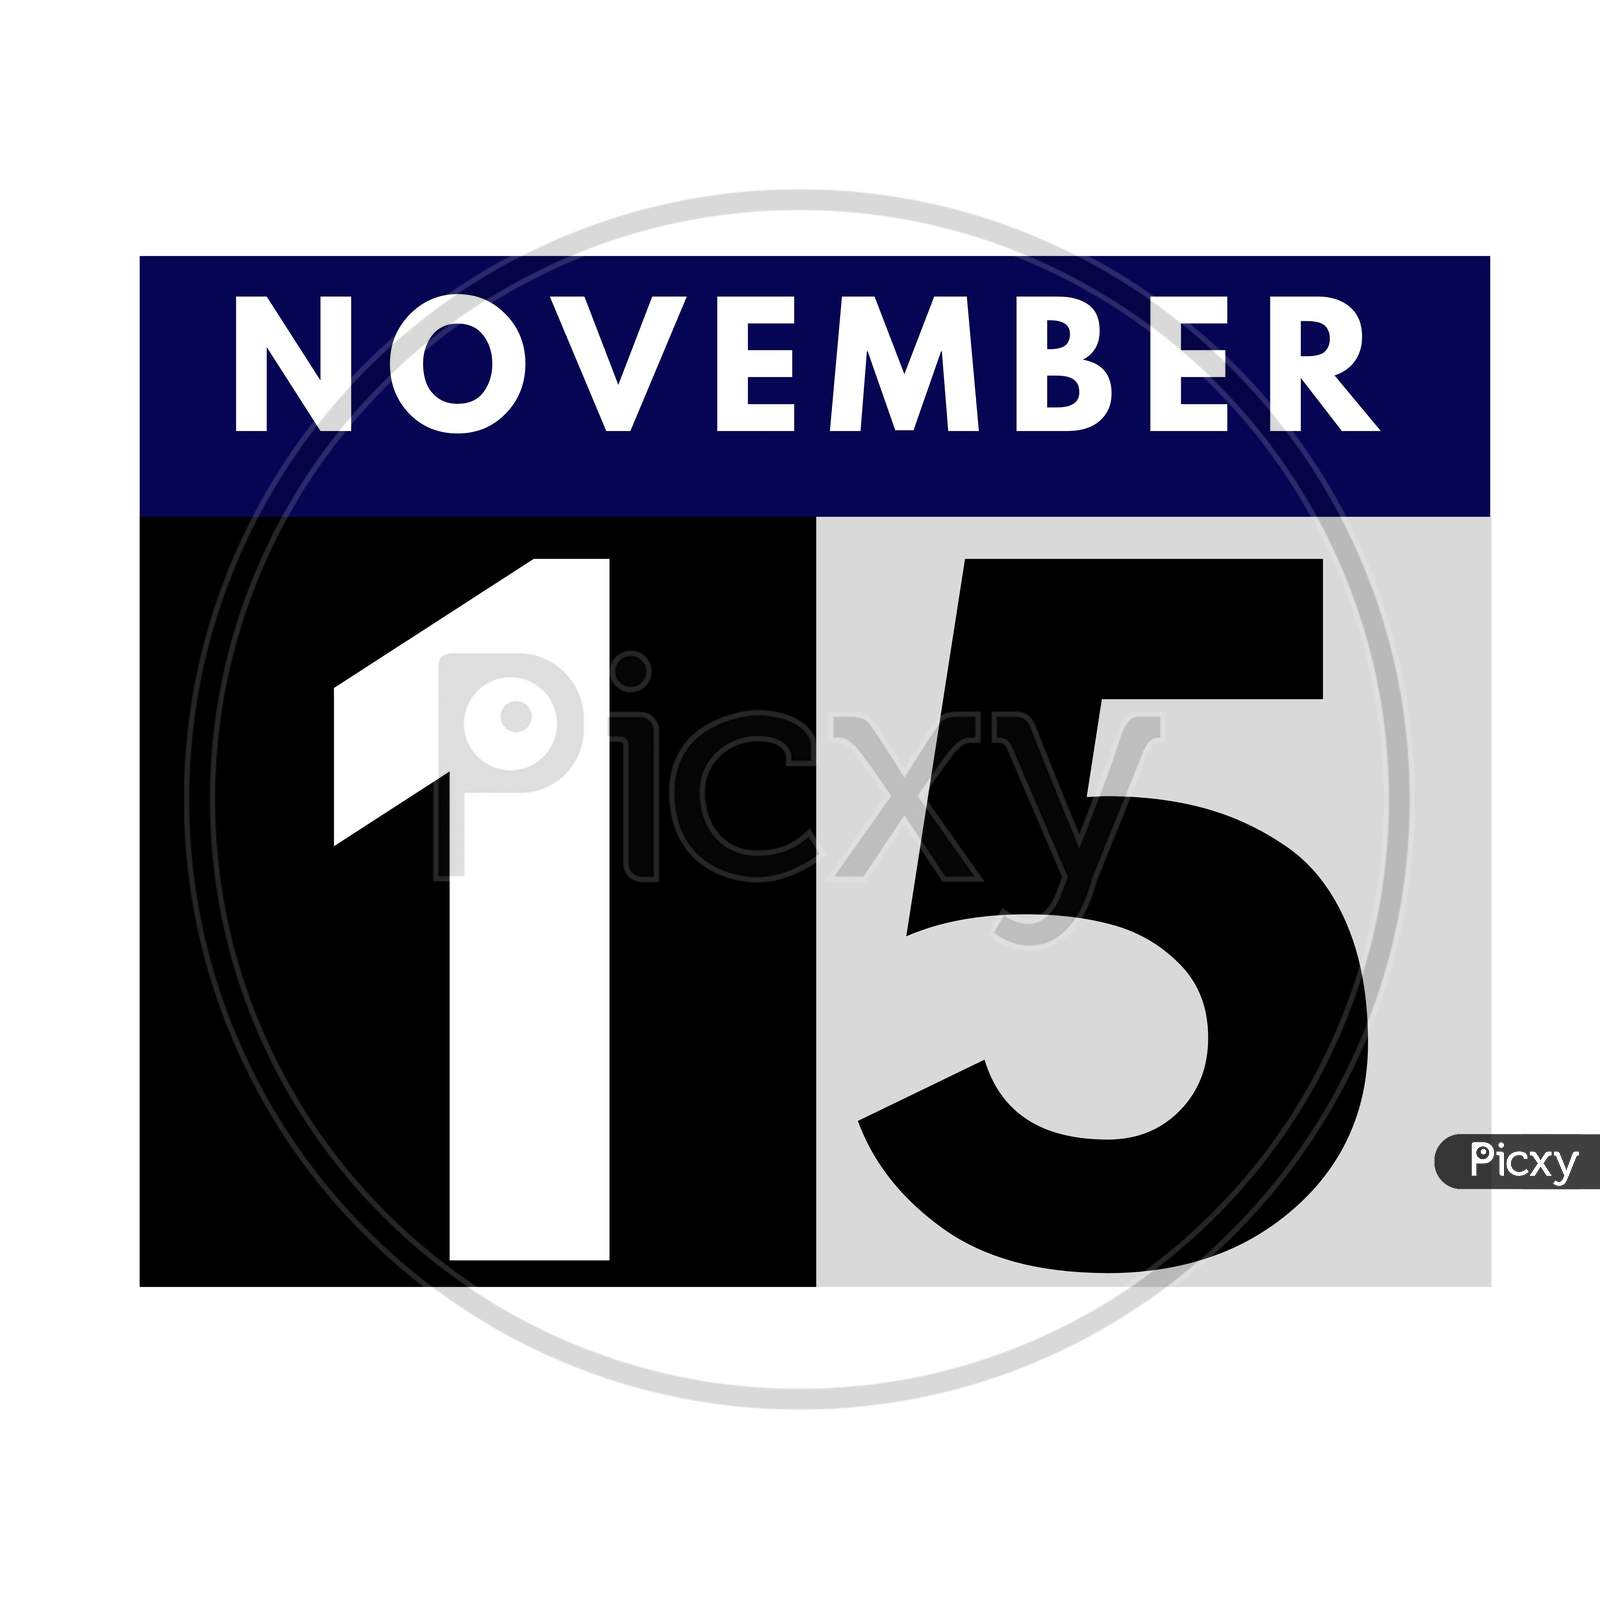 November 15 . Flat Daily Calendar Icon .Date ,Day, Month .Calendar For The Month Of November